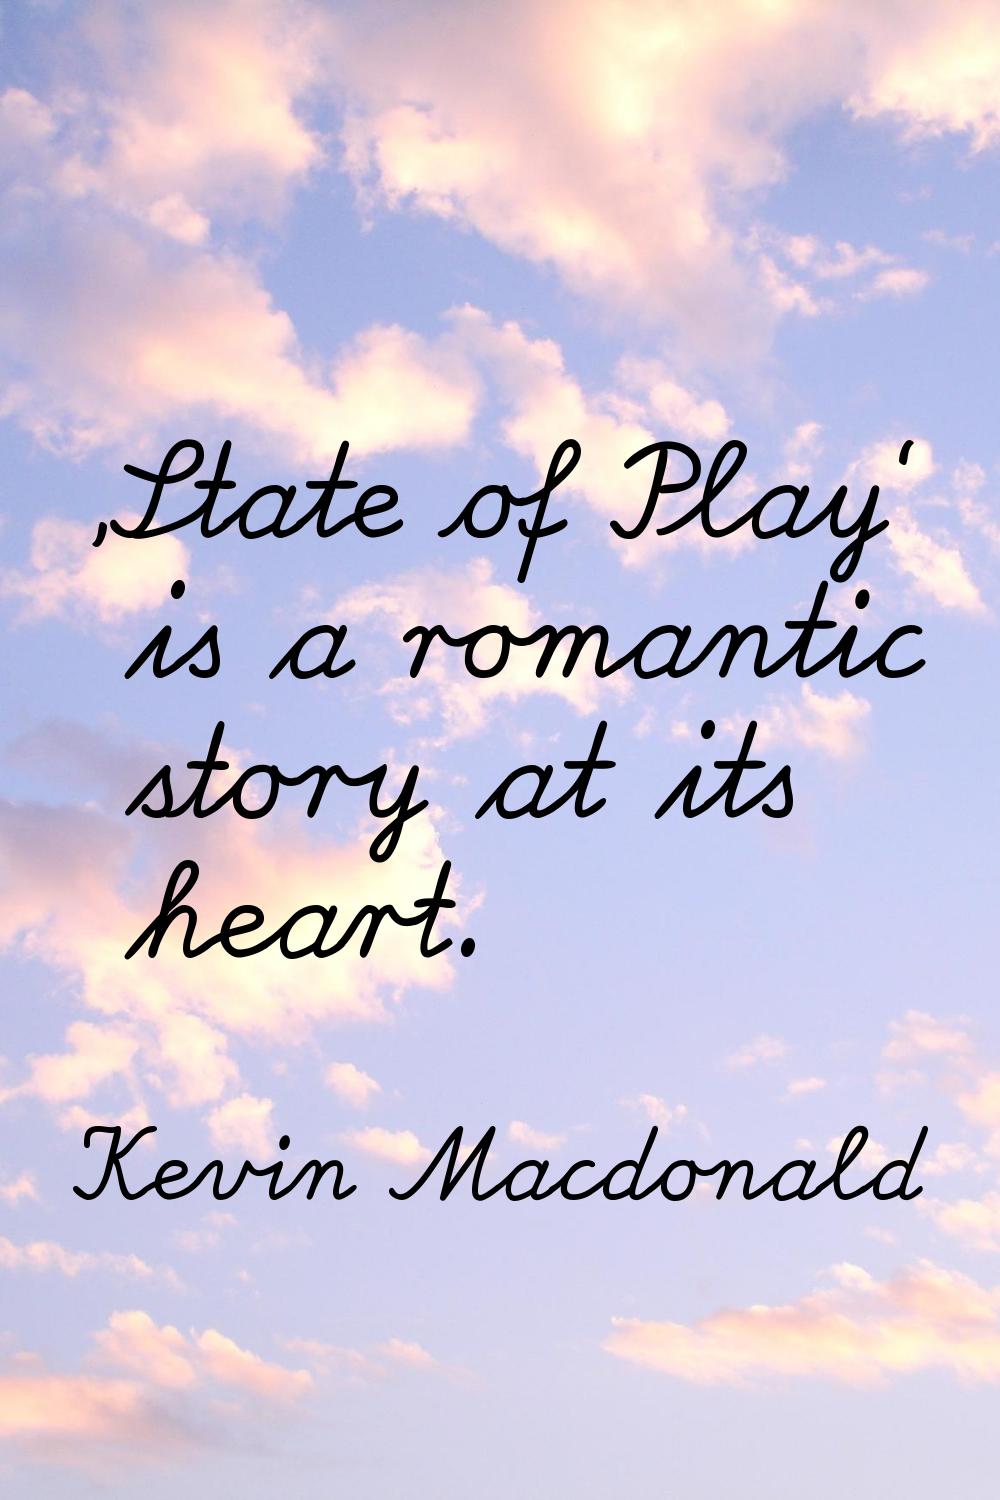 'State of Play' is a romantic story at its heart.